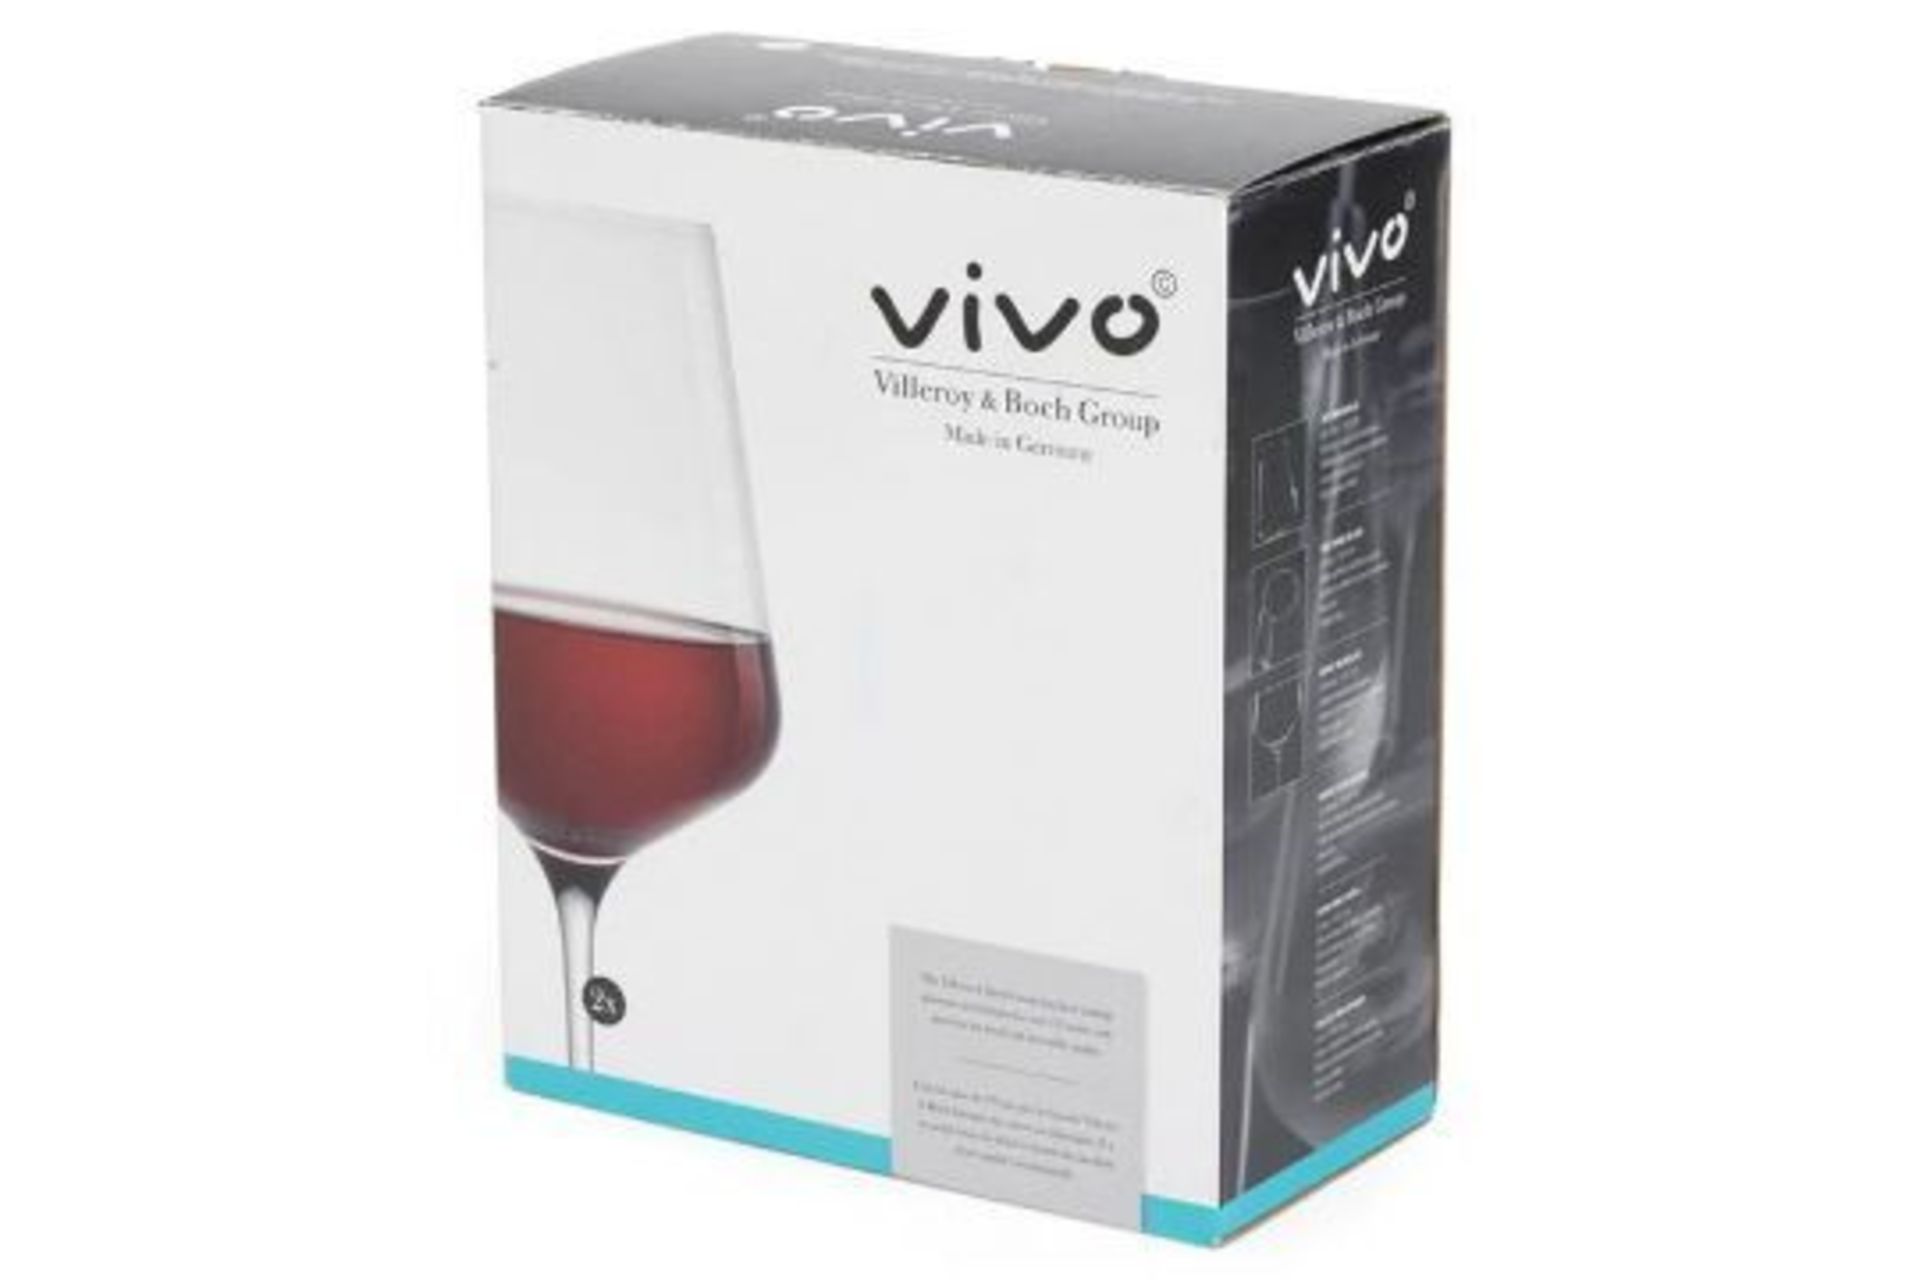 New Villeroy & Boch Set Of 2 Red Wine Glasses - RRP £19.99.